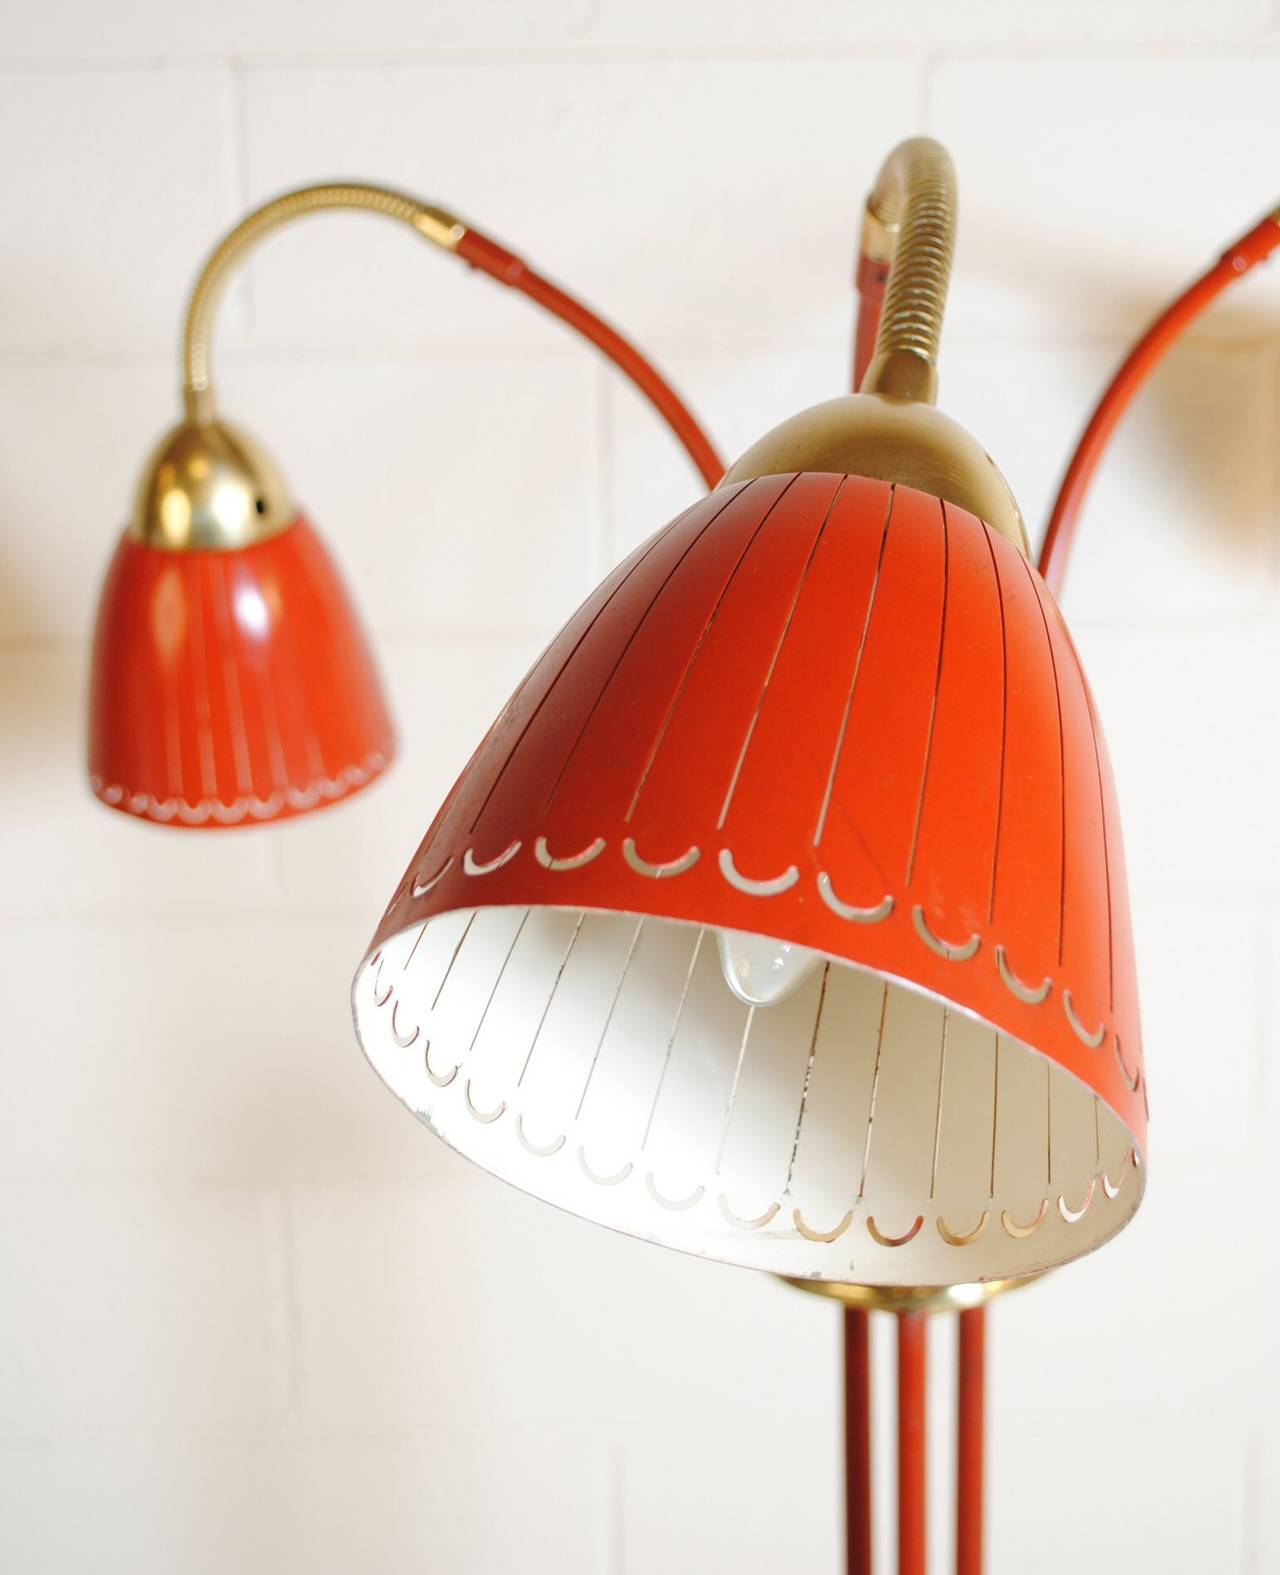 Mid-Century Italian Triennale standing lamp in the style of Stilnovo in red enamel and brass.